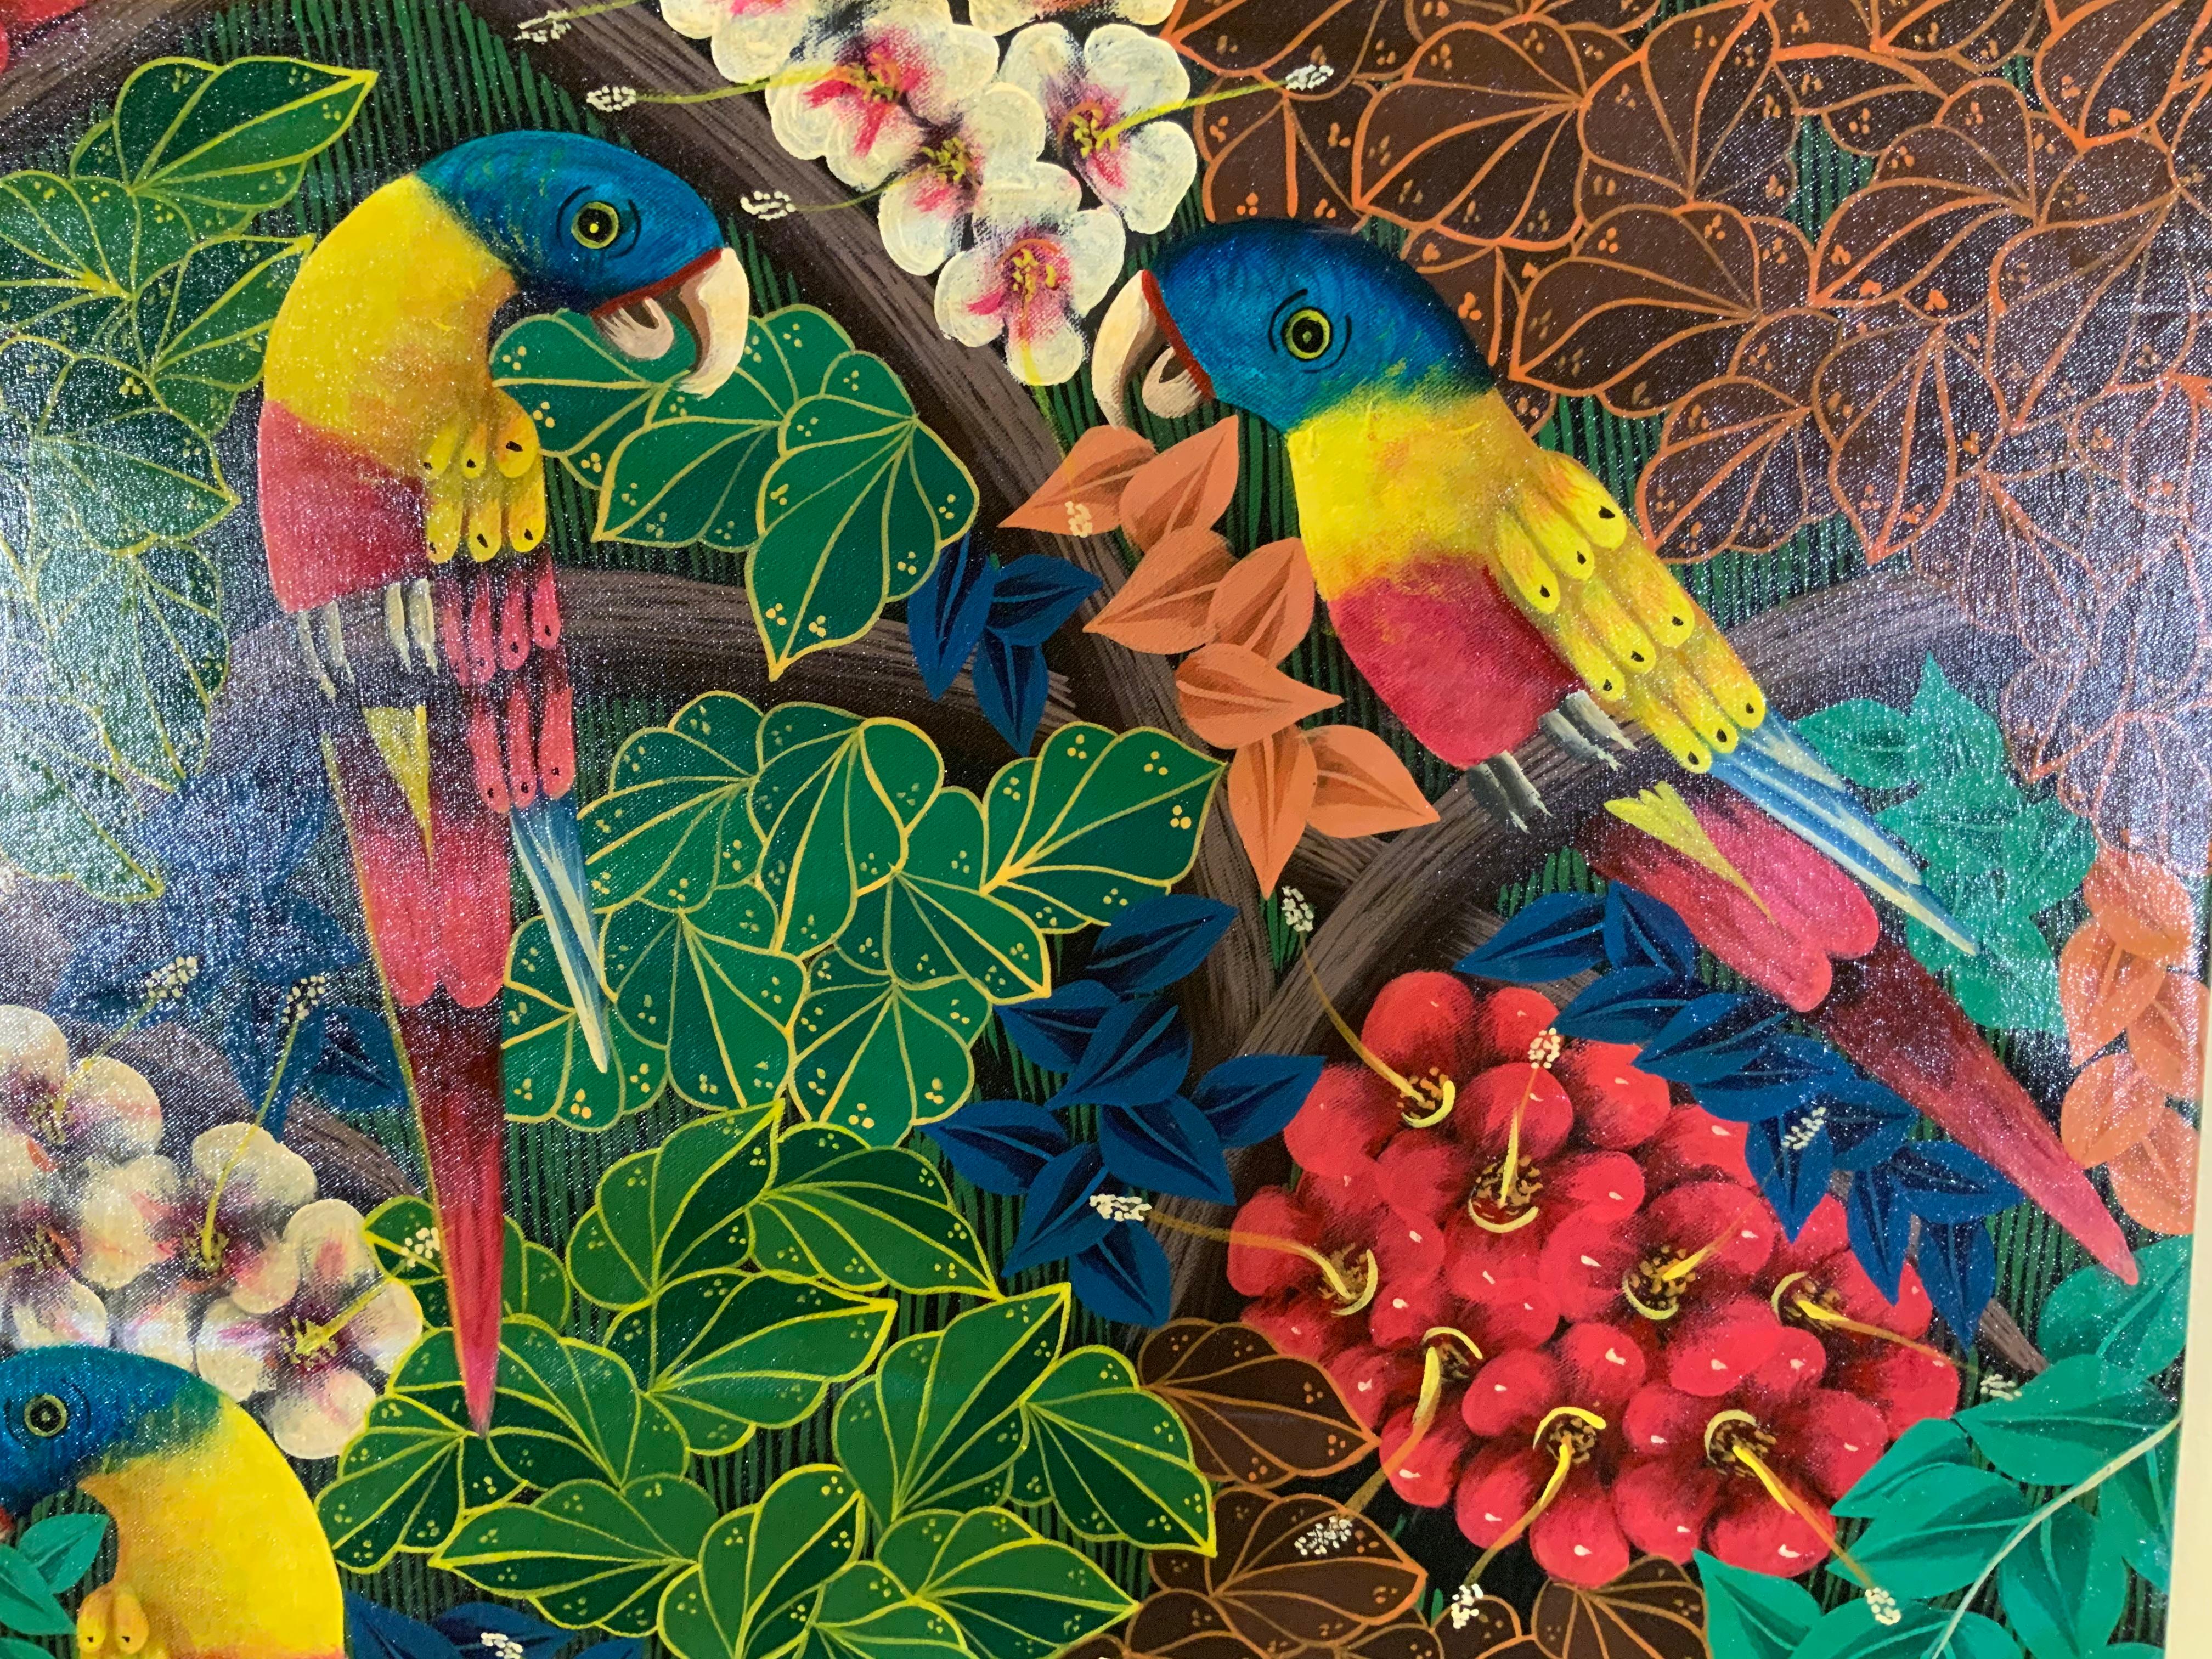 Large Parrots in the Jungle, Haitian Acrylic Painting on Canvas 5